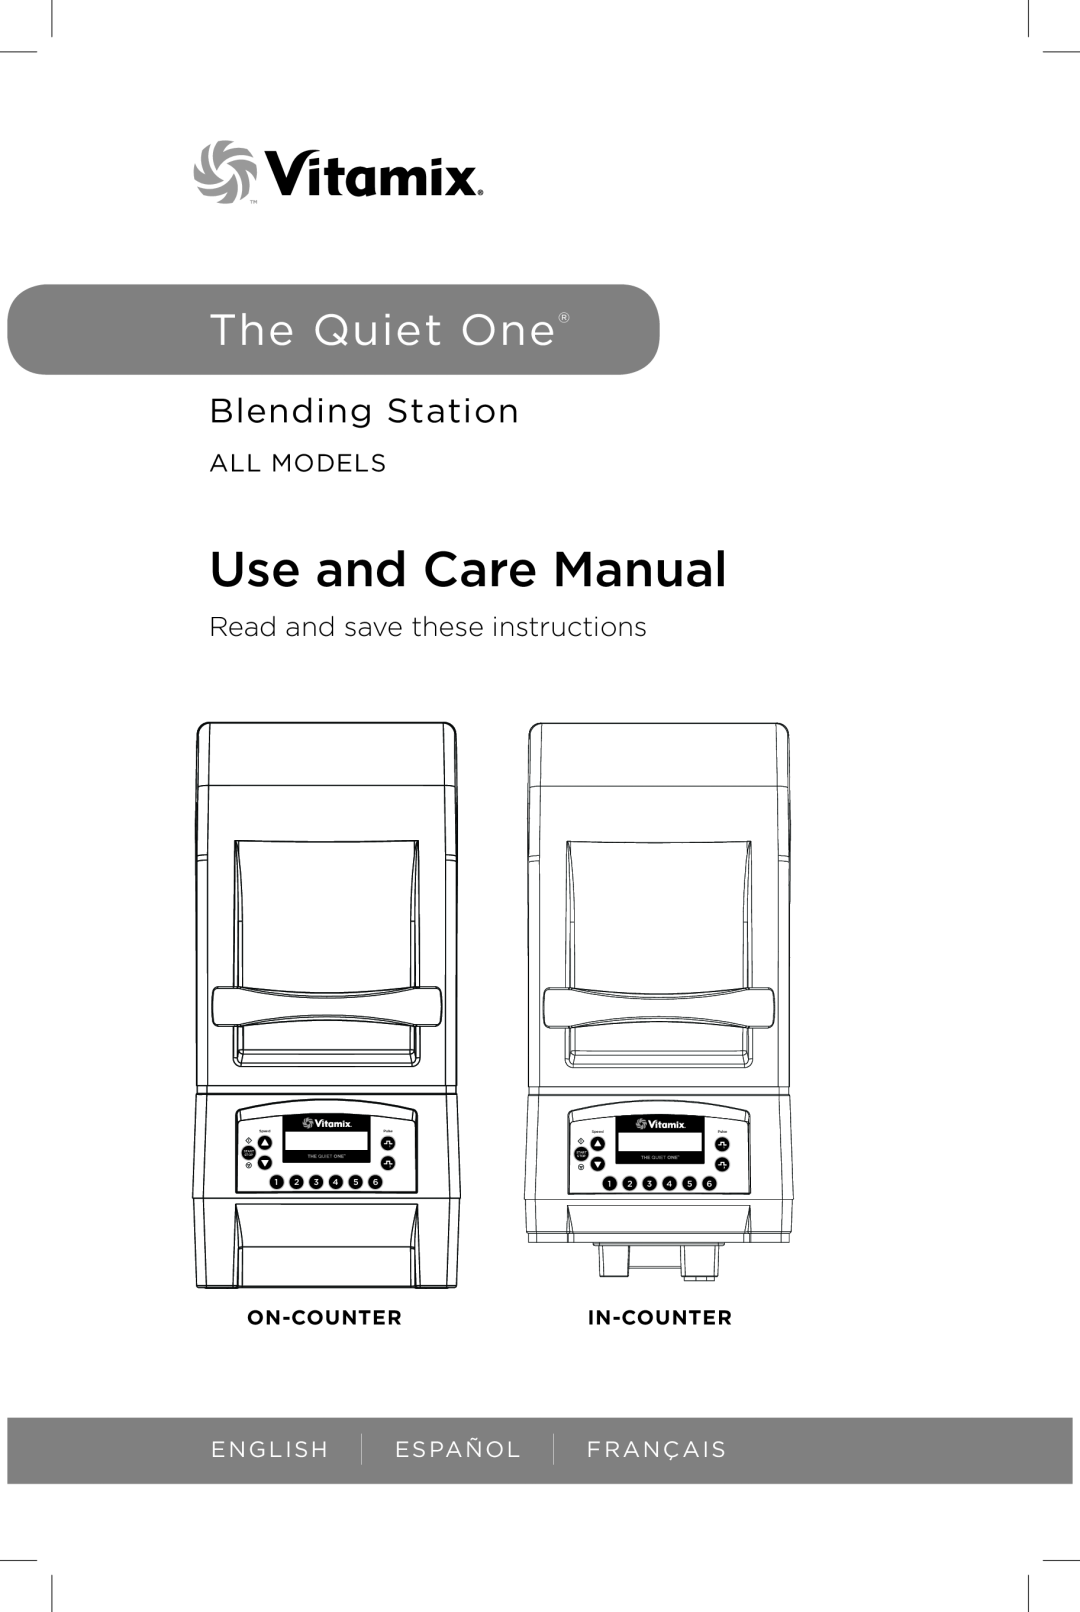 Vita-Mix The Quiet One manual Use and Care Manual, Blending Station, Read and save these instructions, All Models, Speed 